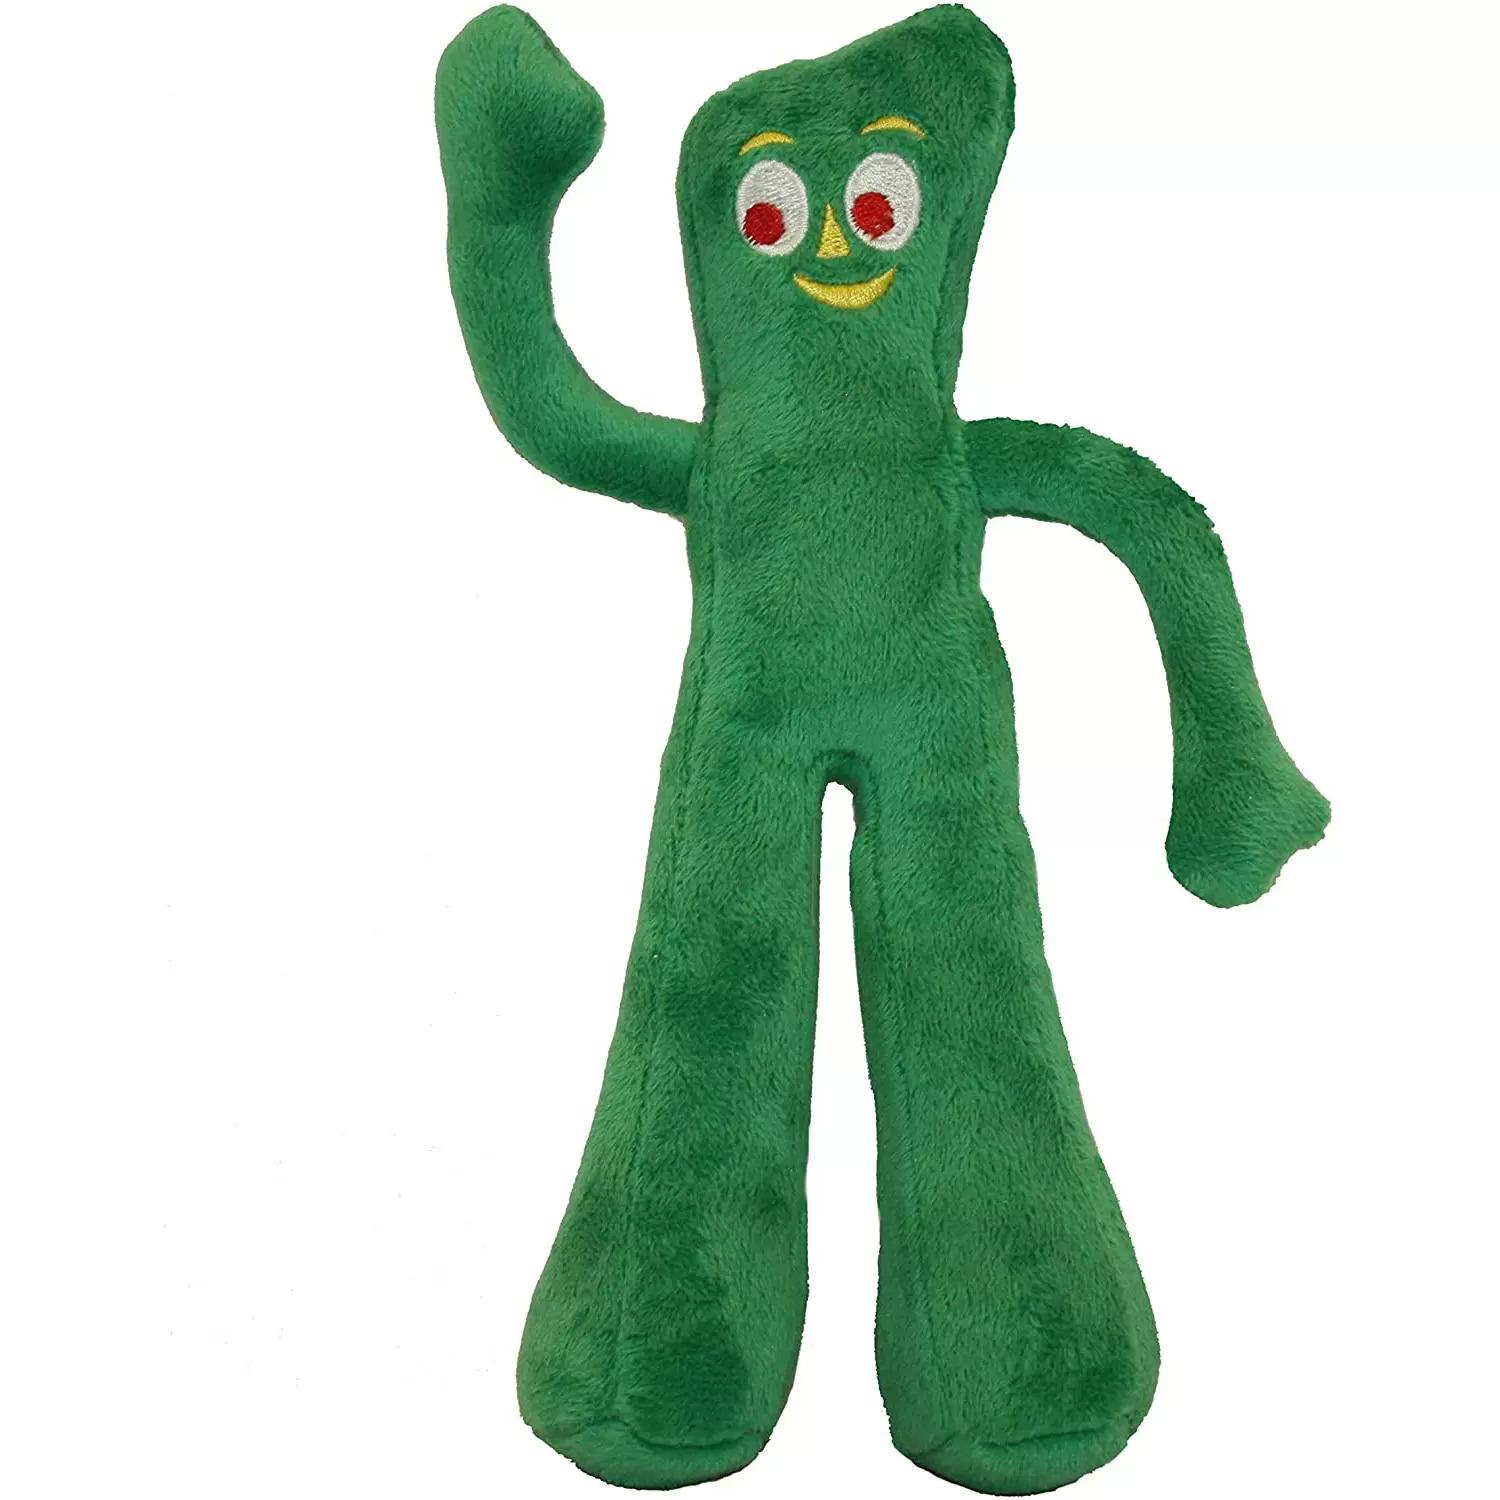 Multipet Gumby Squeaky Plush Dog Toy for $2.53